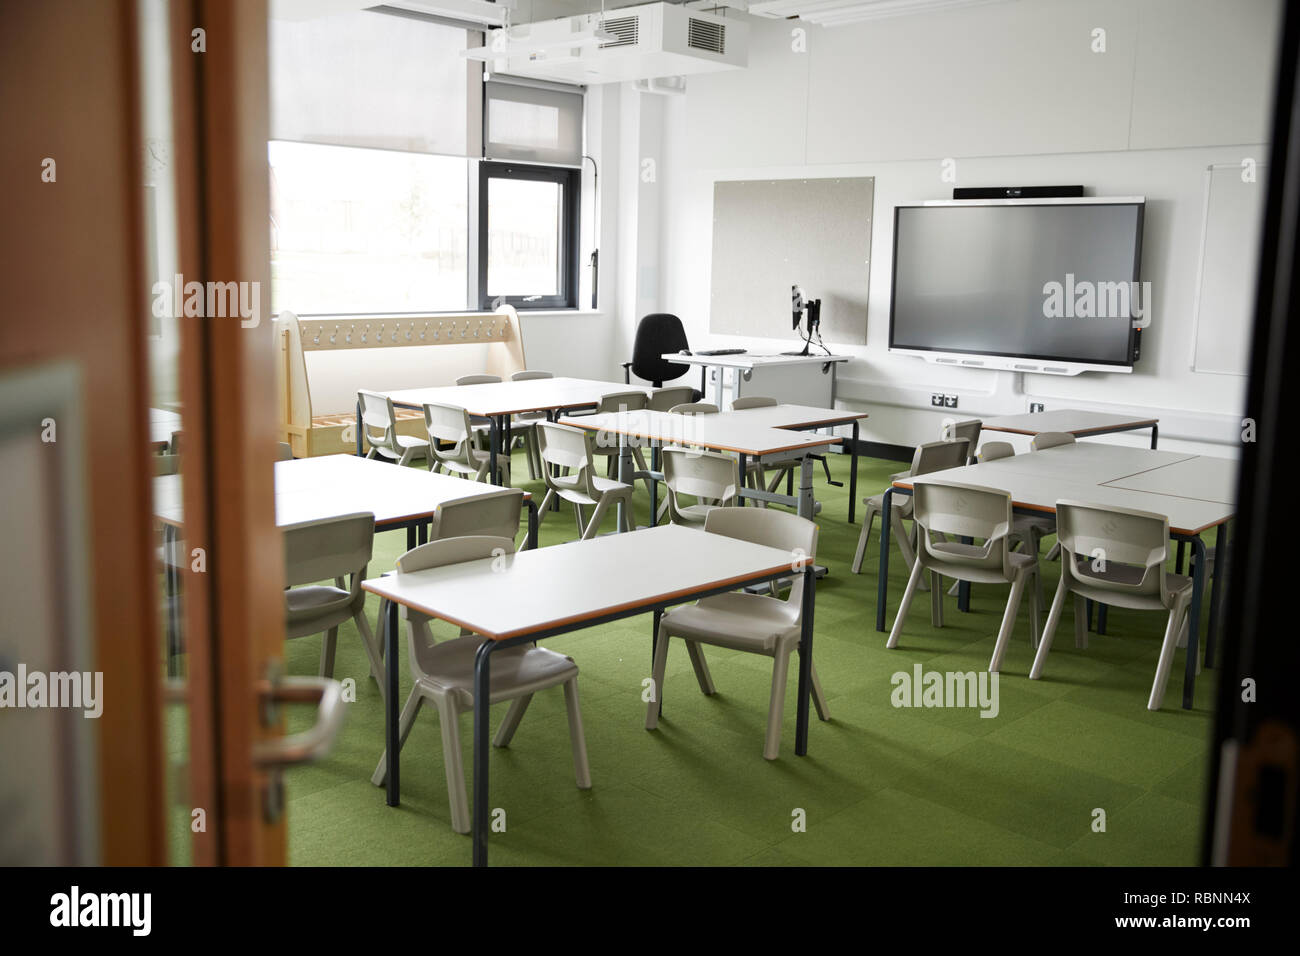 An empty classroom in a primary school with white desks and chairs, seen from doorway Stock Photo